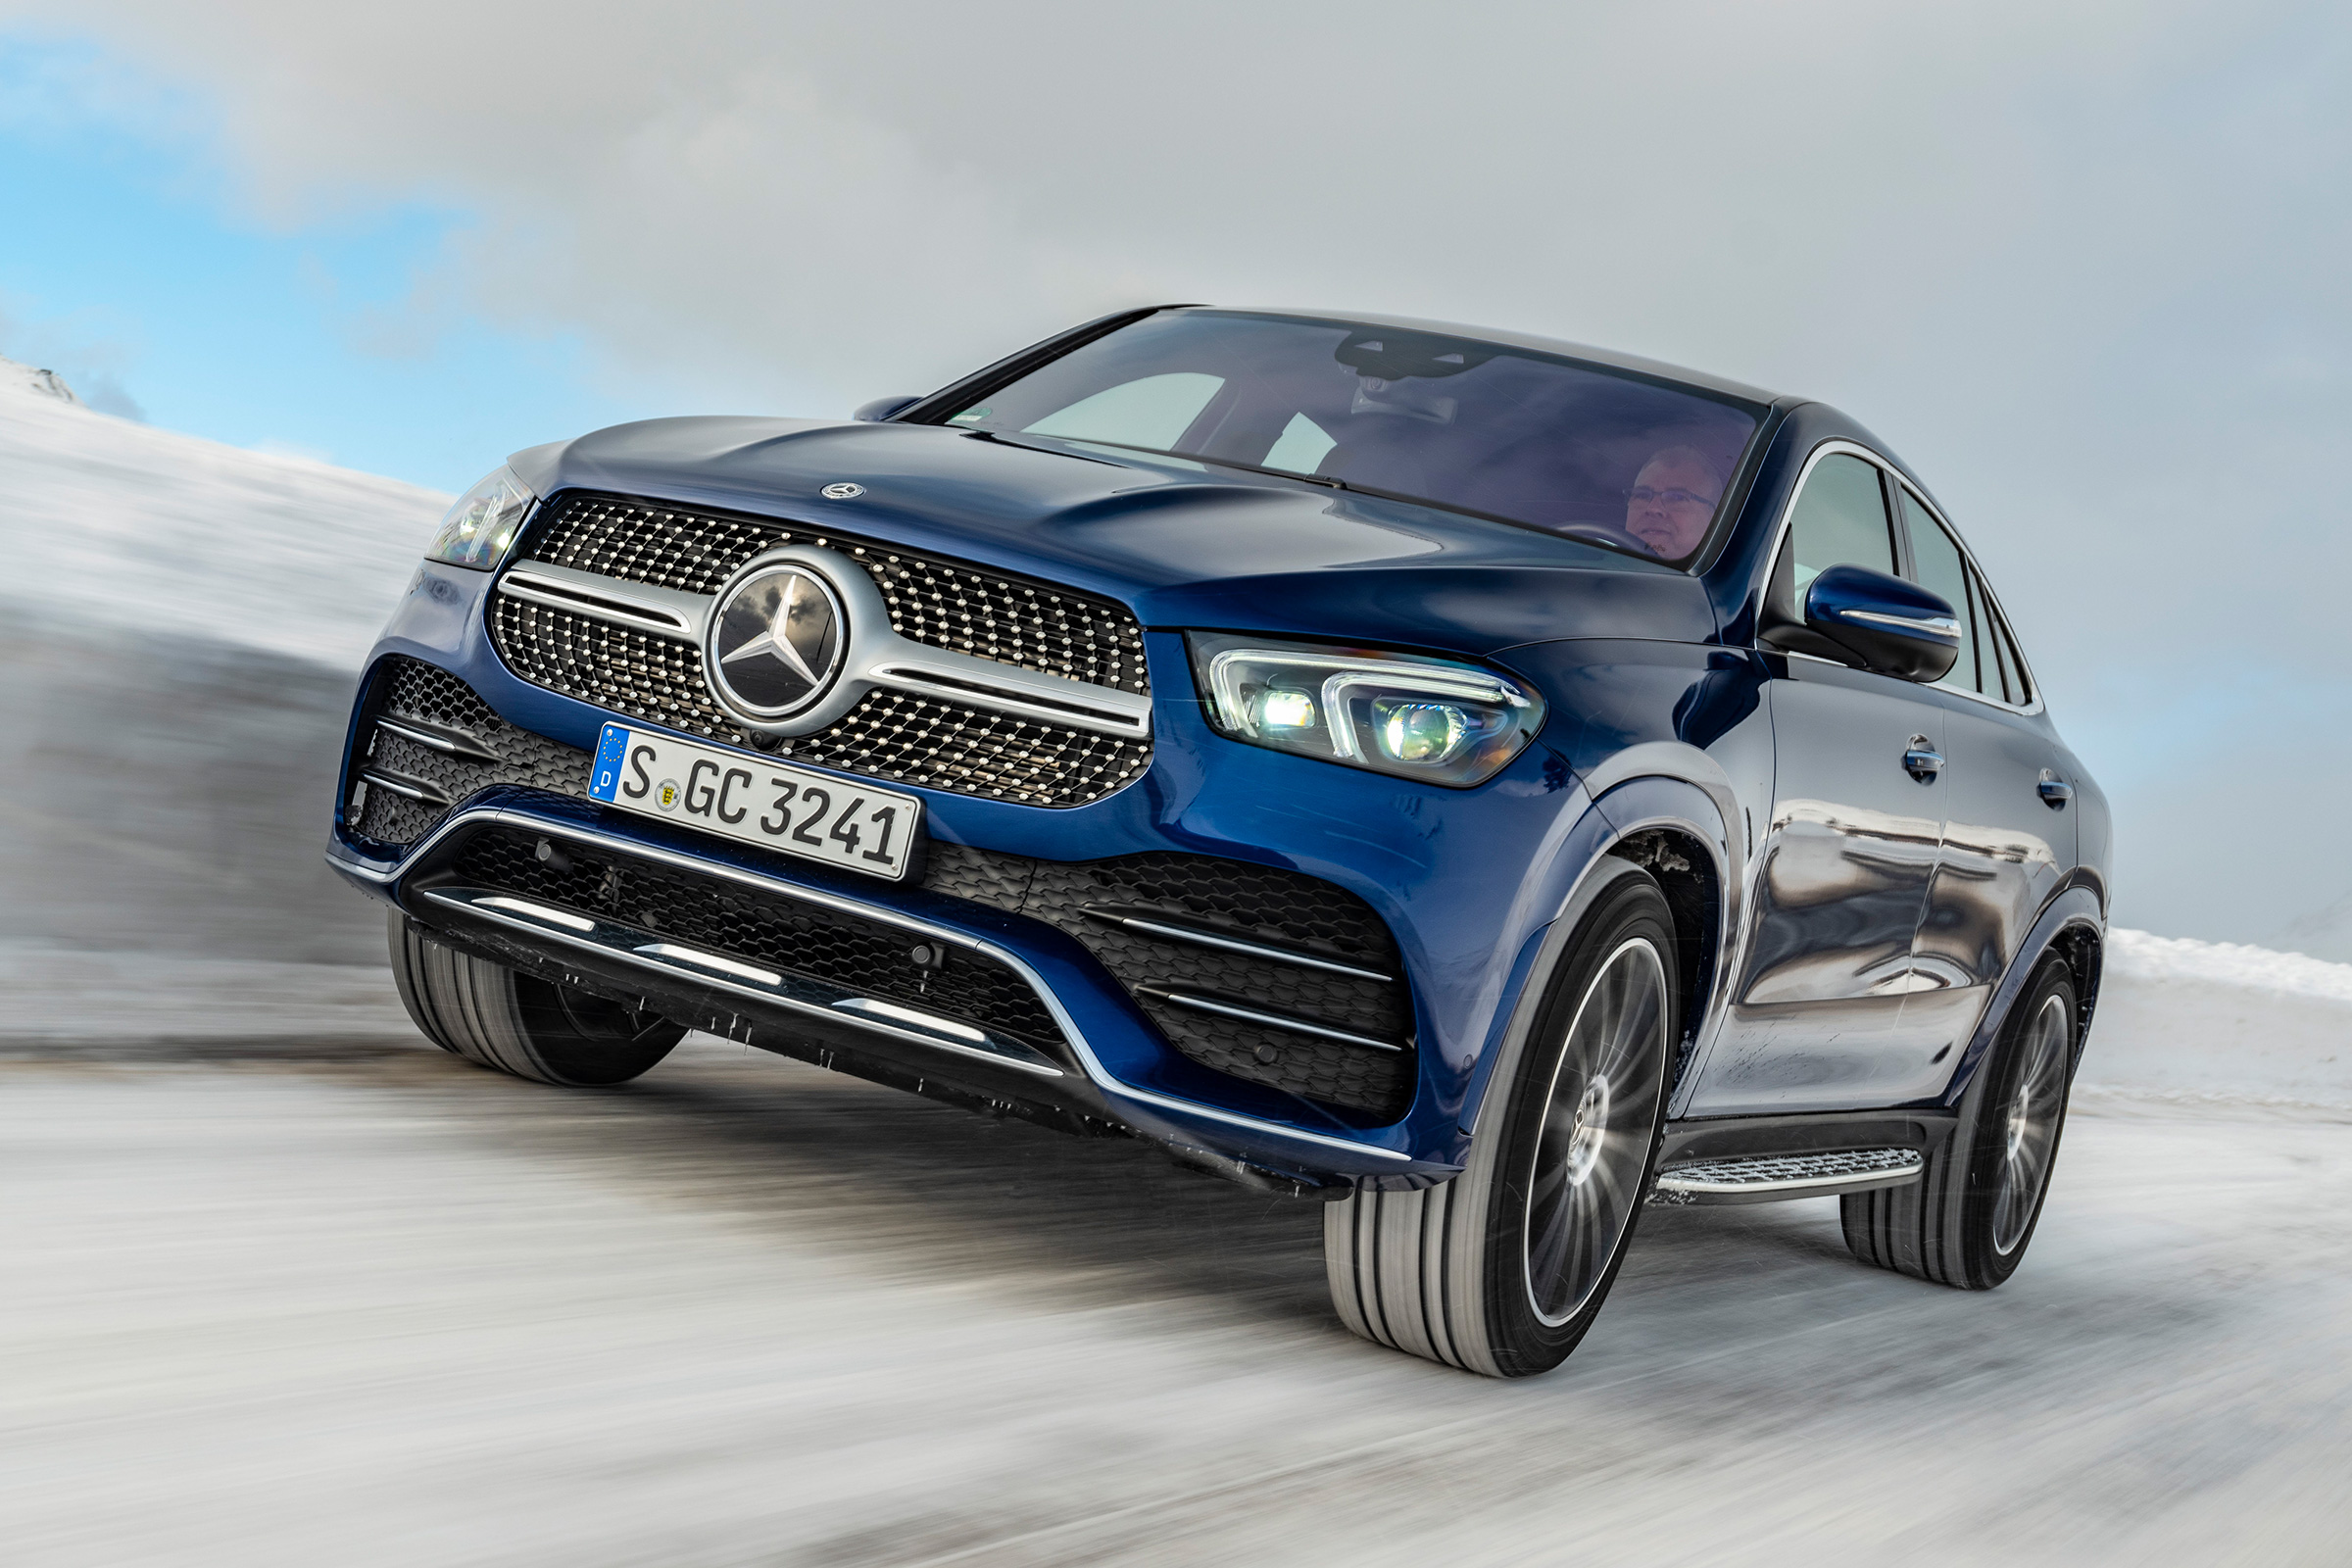 Mercedes GLE Coupe SUV review pictures Carbuyer